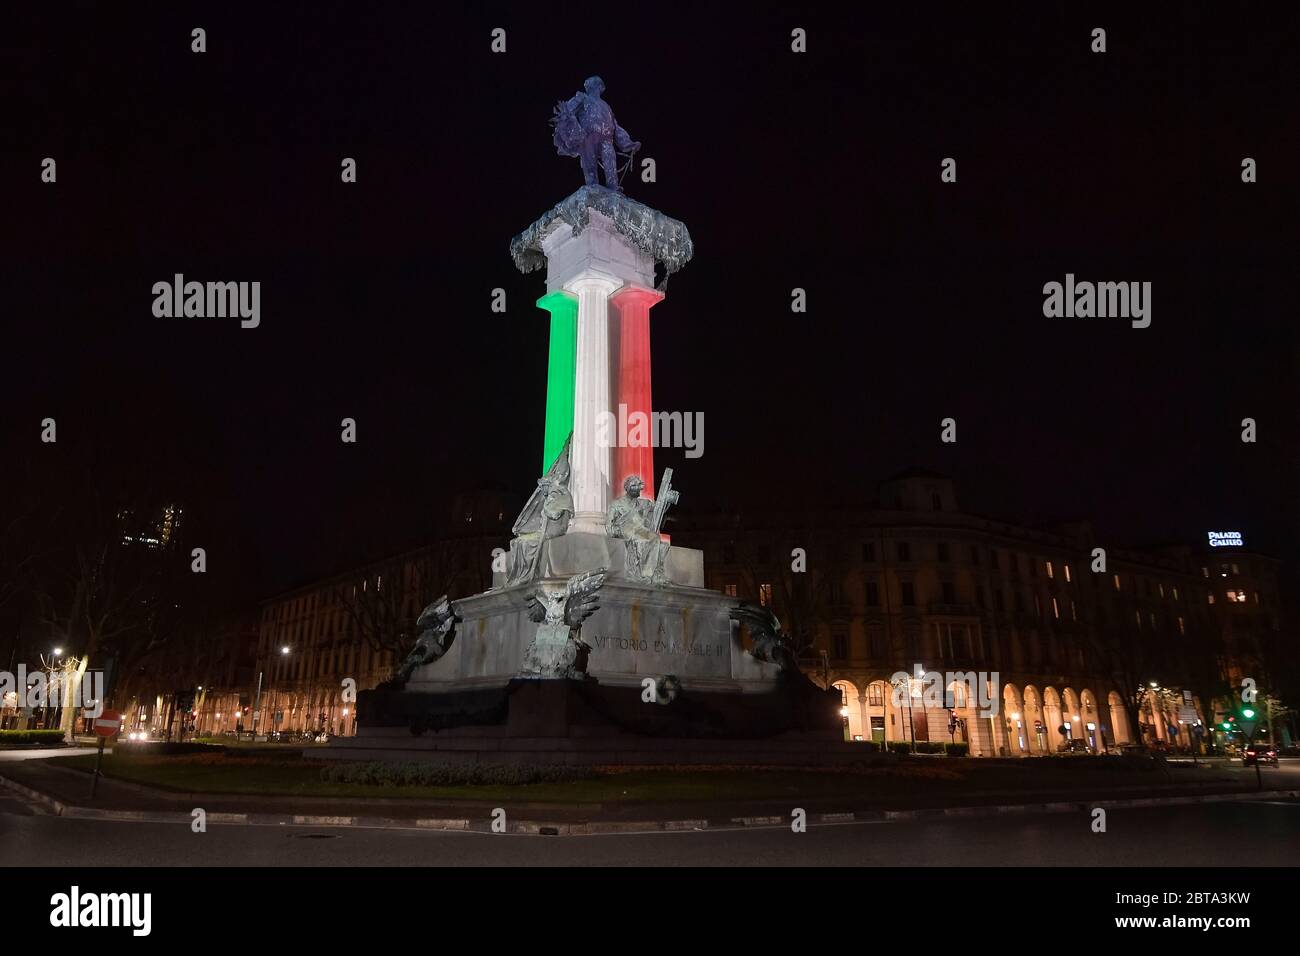 Turin, Italy - 13 March, 2020: Monument to Vittorio Emanuele II (Victor Emmanuel II) is illuminated with colours of Italian flag (green, white, red). Vittorio Emanuele II was first king of united Italy, monument will be illuminated from 13 March to 18 March to celebrate 200 years from birth of Vittorio Emanuele II (14 March 1820) and anniversary of the Unification of Italy (17 March 1861). Credit: Nicolò Campo/Alamy Live News Stock Photo